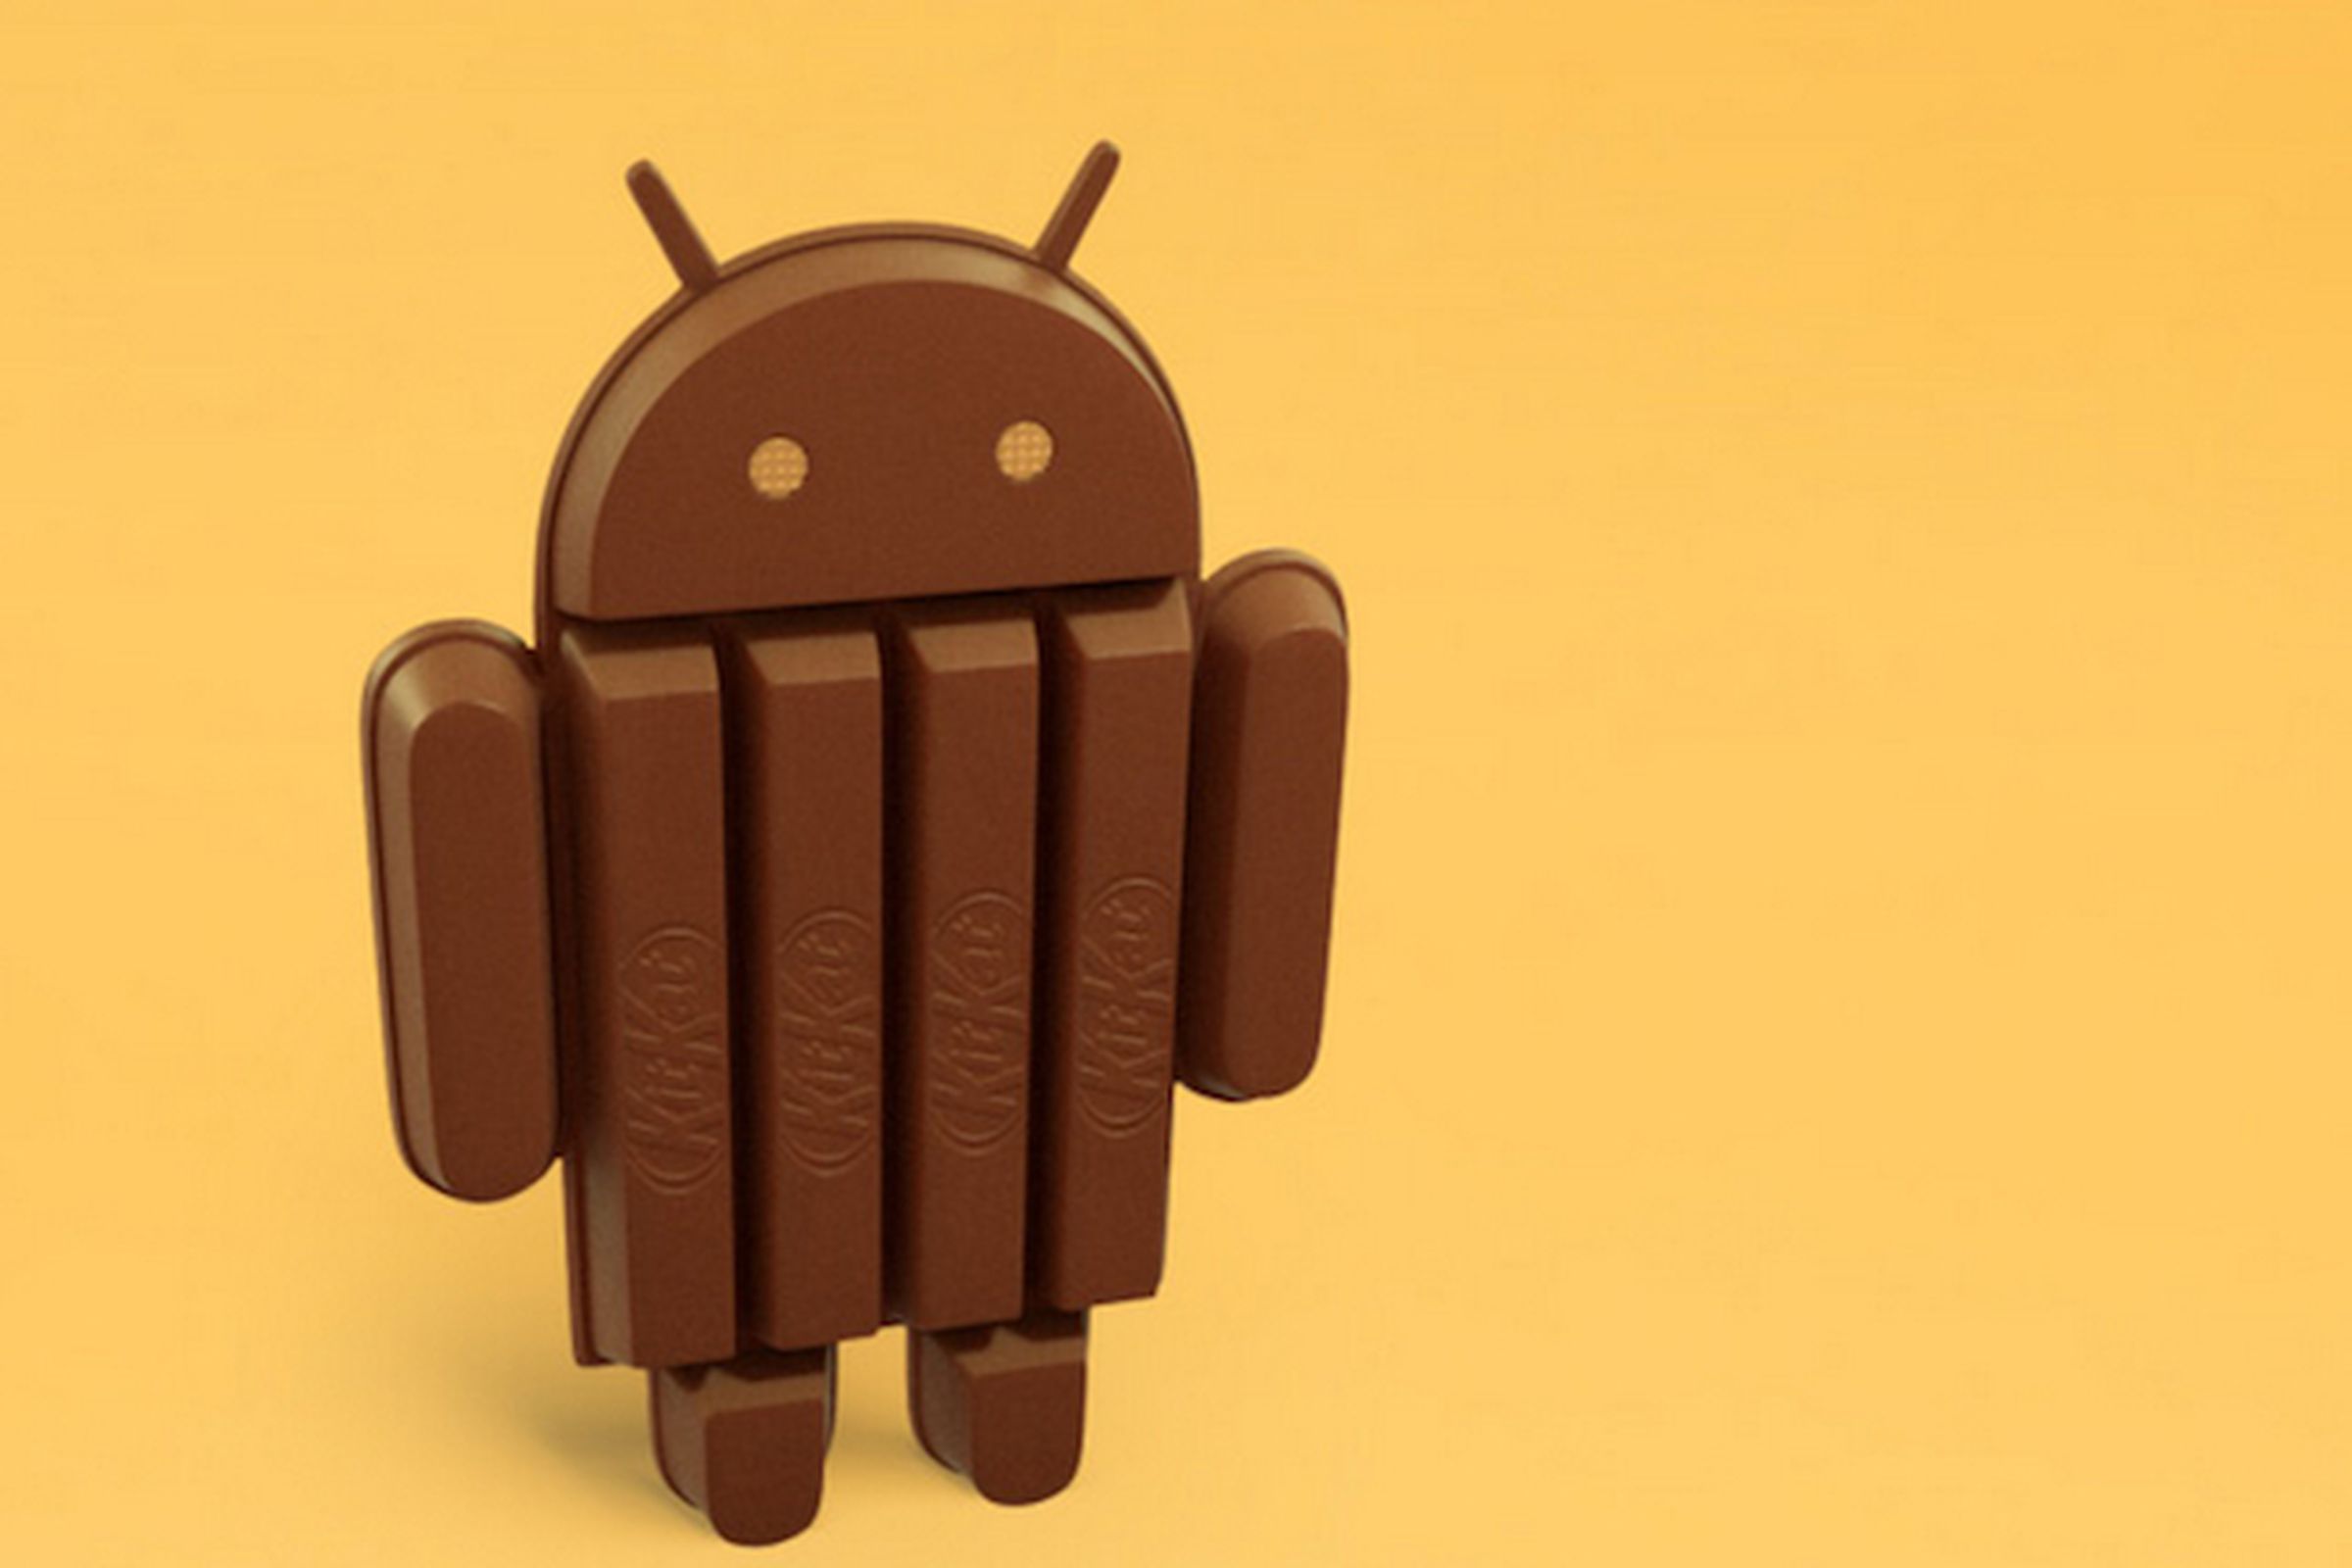 Android 4.4 KitKat coming to Nexus 7 and 10 starting today The Verge